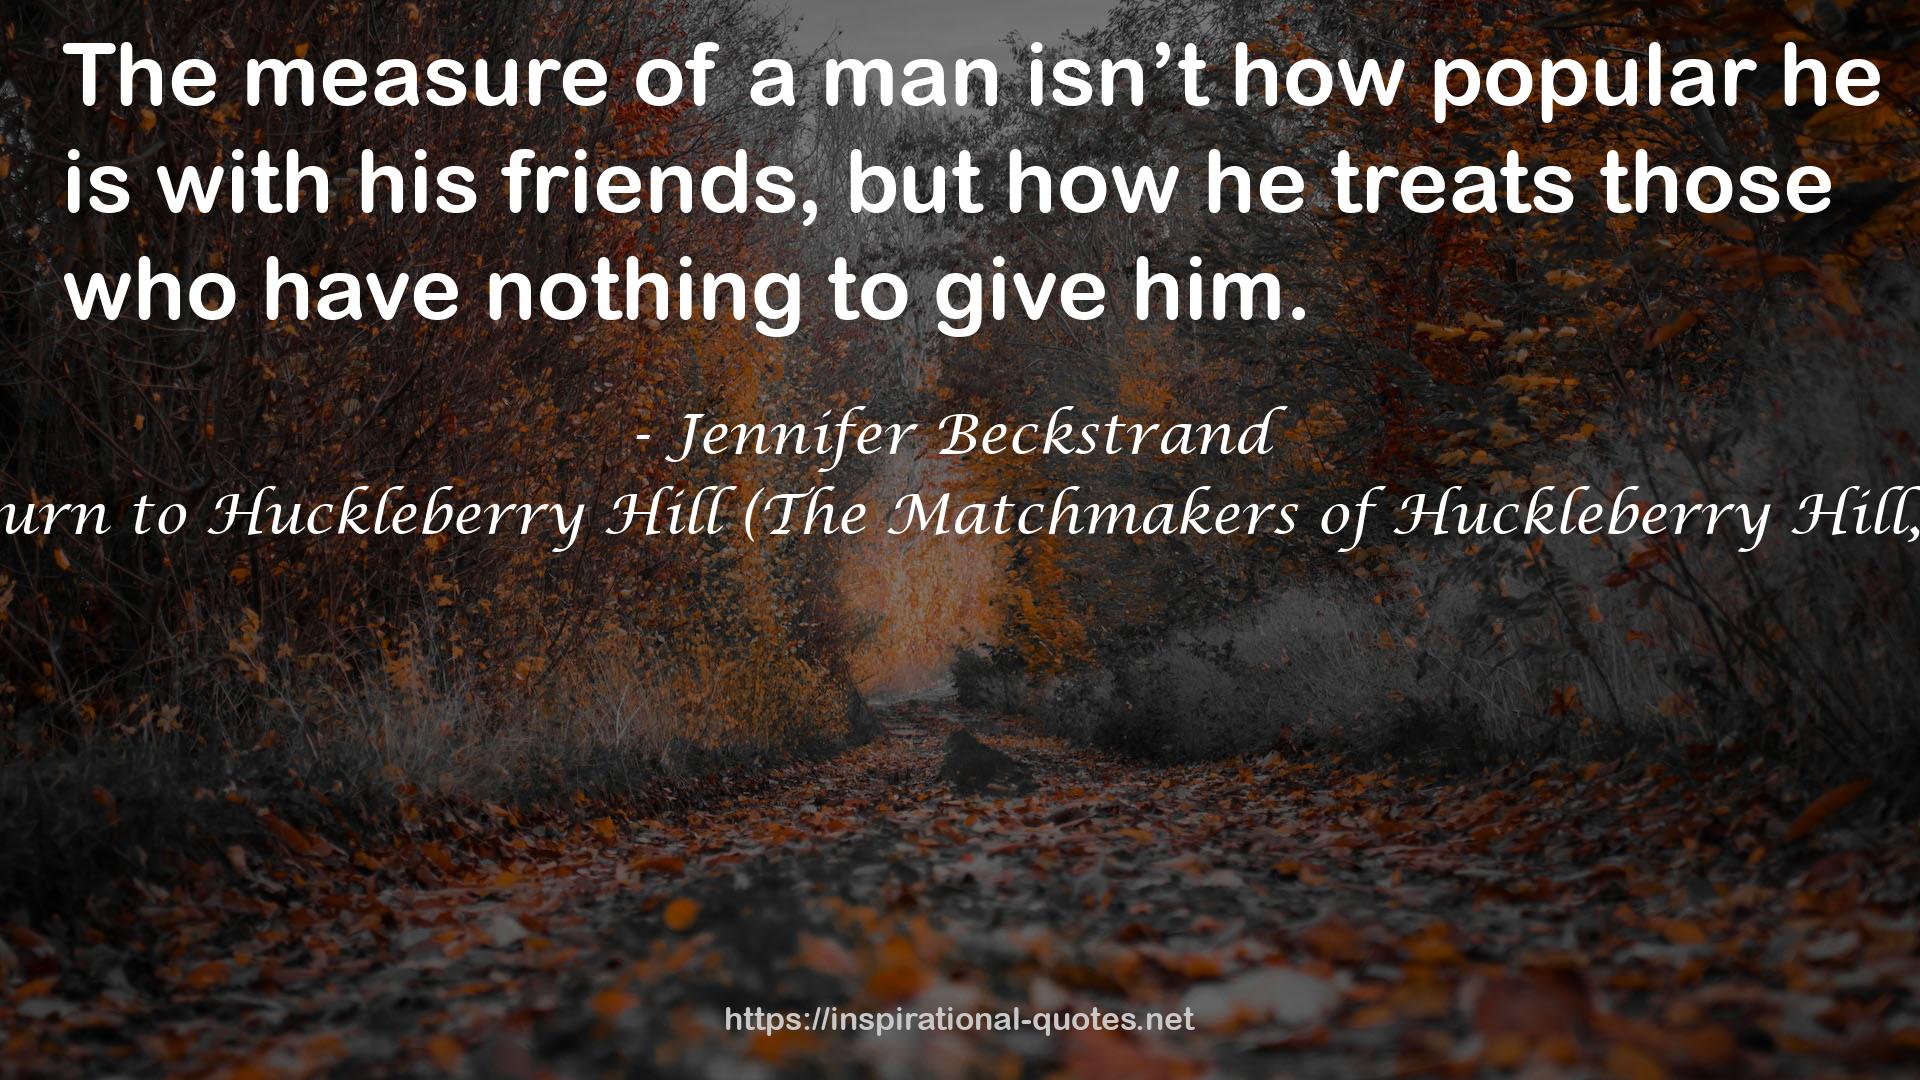 Return to Huckleberry Hill (The Matchmakers of Huckleberry Hill, #7) QUOTES